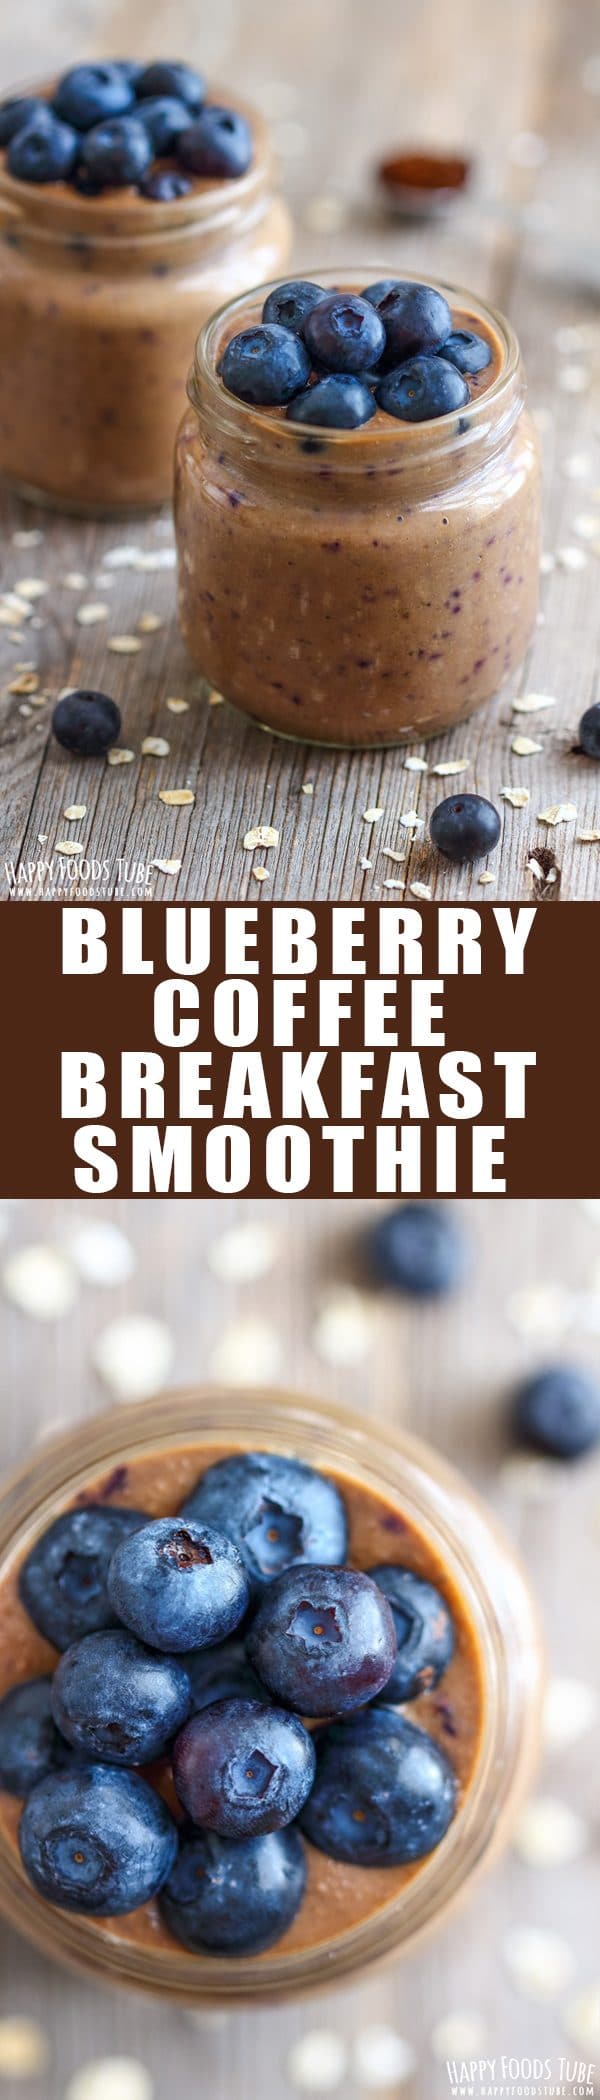 Coffee Recipes: Blueberry Coffee Smoothie In Sungai Penuh